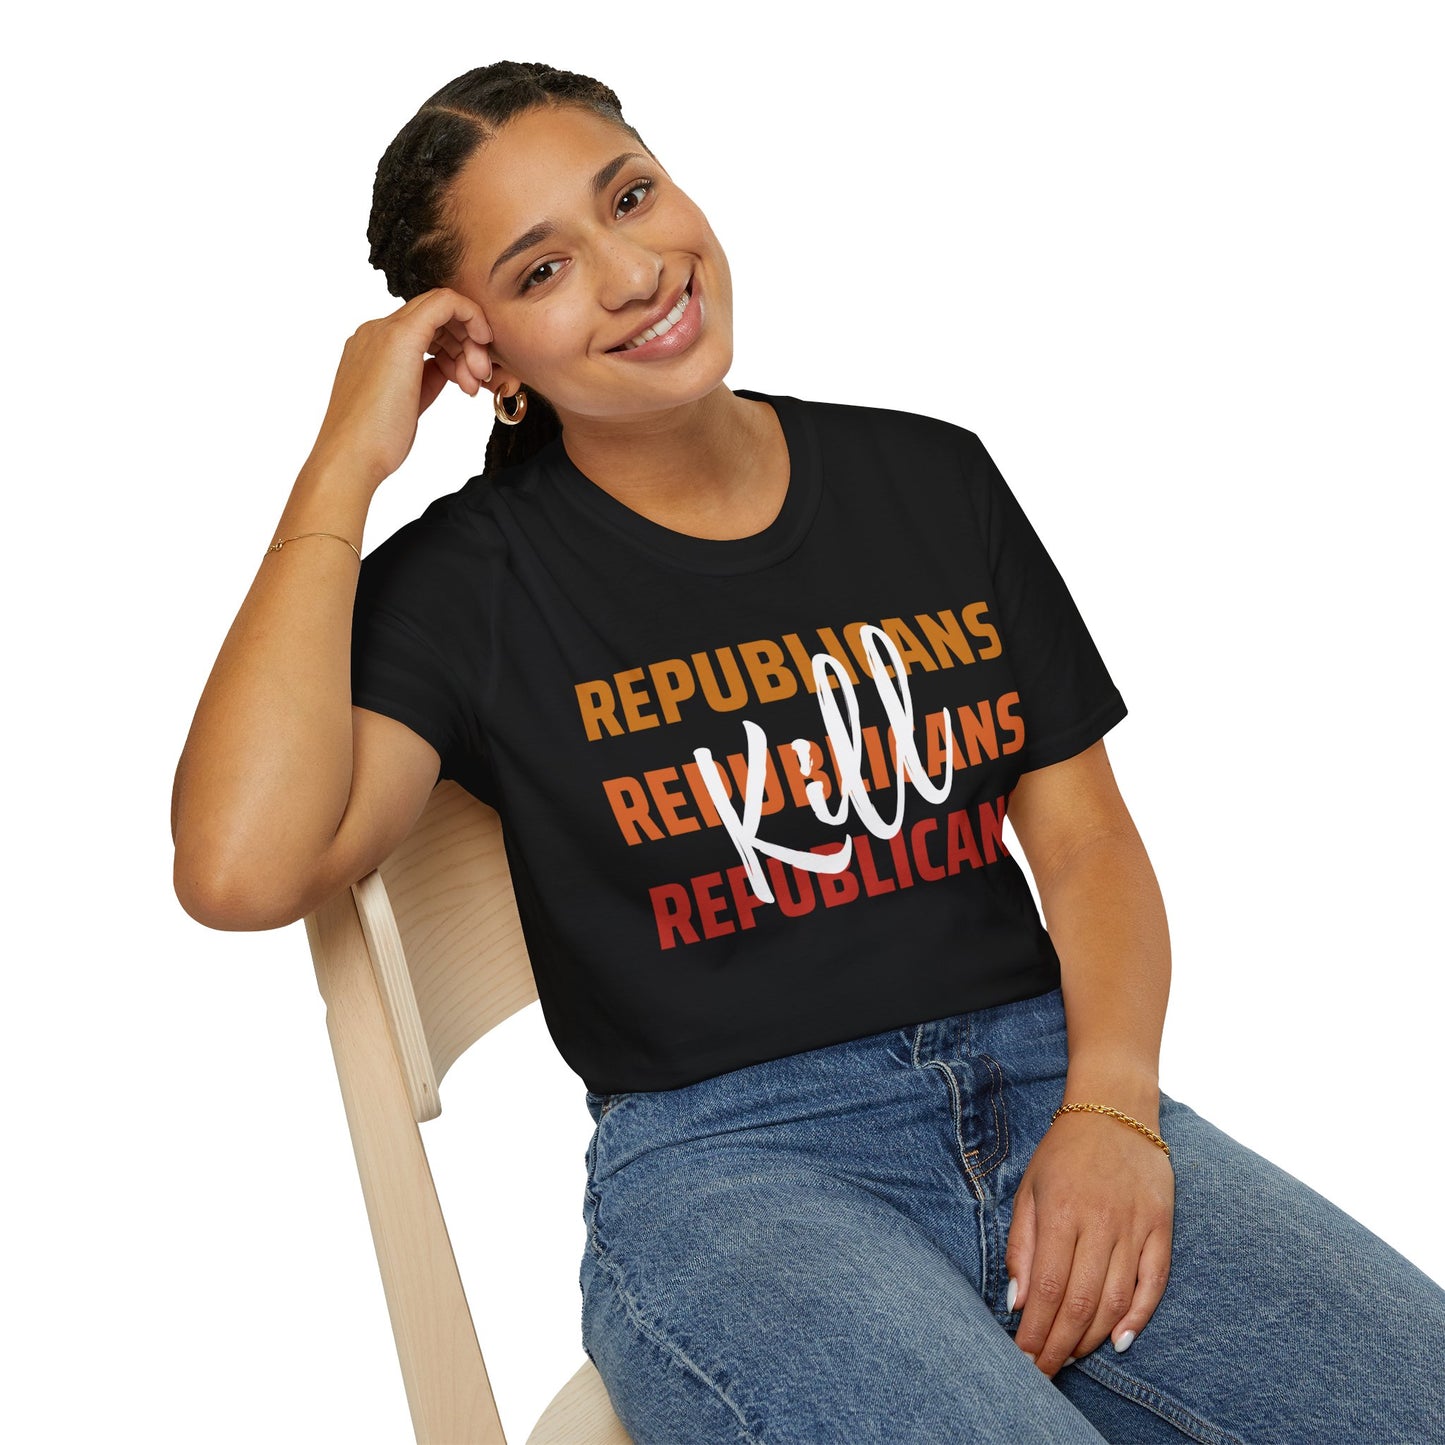 Republicans Kill Soft Style t-shirt |unisex| Bold Political Statement! For the Most Committed to Truth Telling!